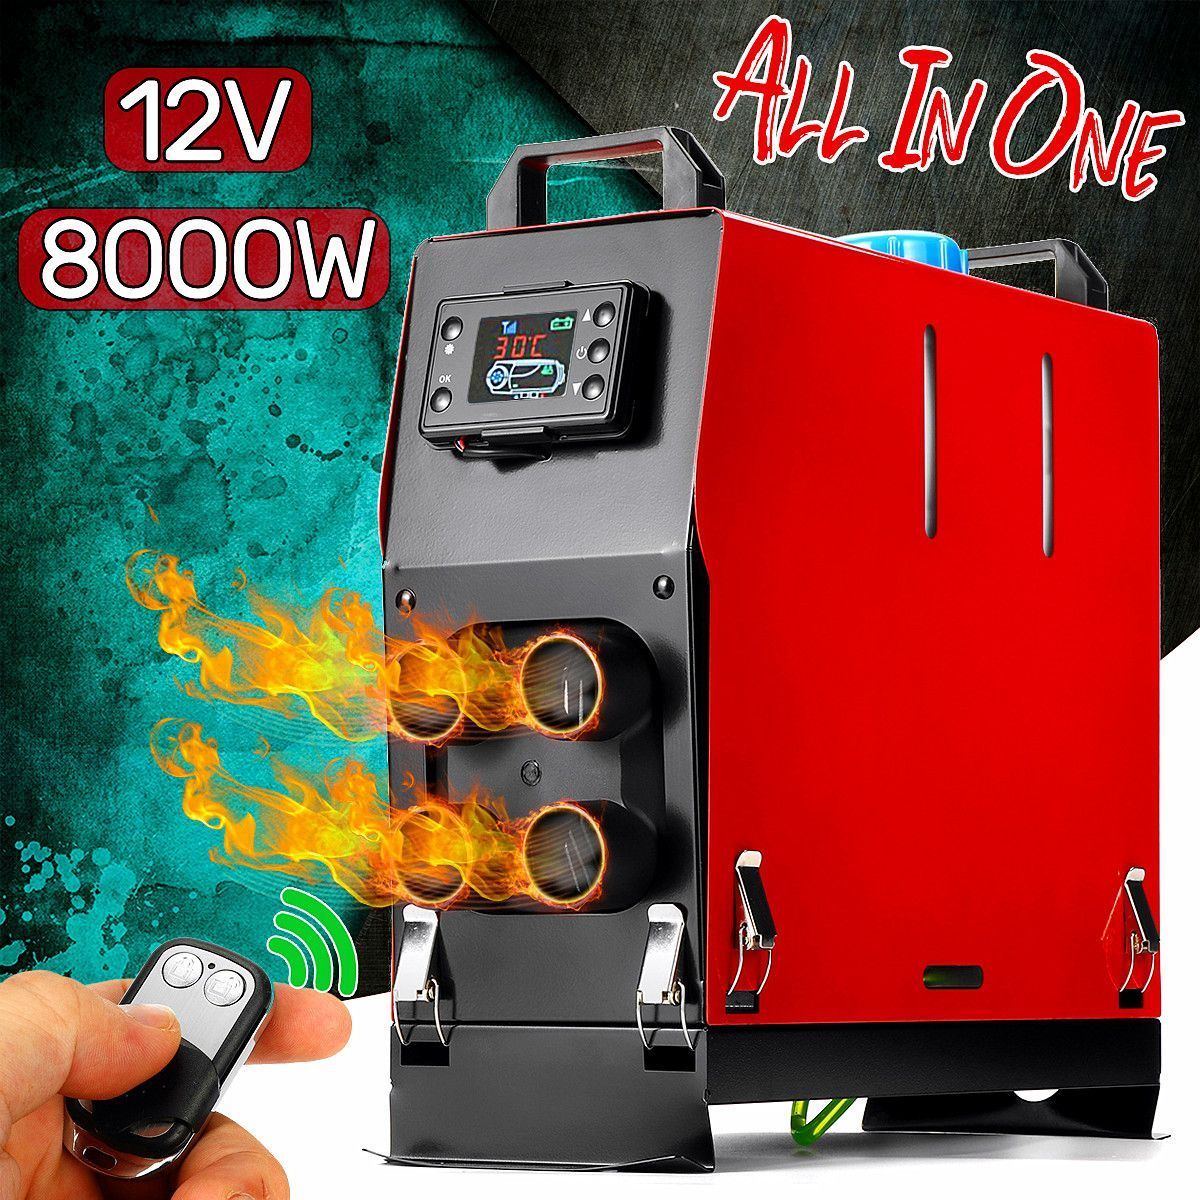 All-In-1-Integrated-Machine-12V-8000W-Diesel-Air-Heater-LCD-Car-Air-Parking-Heater-with-Remote-1432616